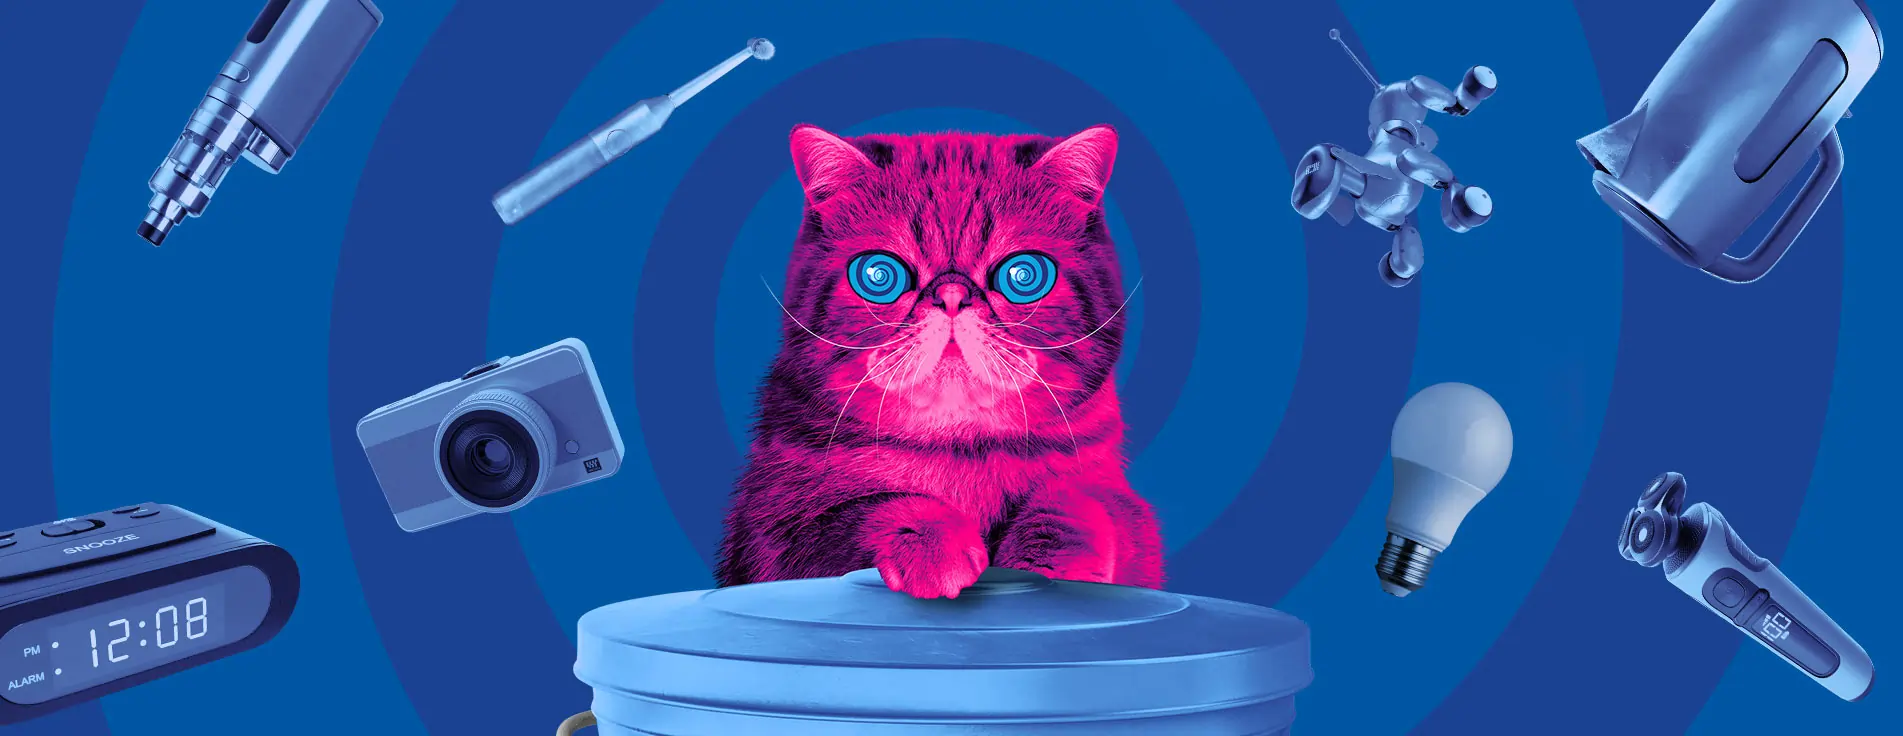 Image of Hypnocat - a bright pink persian cat - leaning on a waste bin with various small electricals swirling around him on a blue background